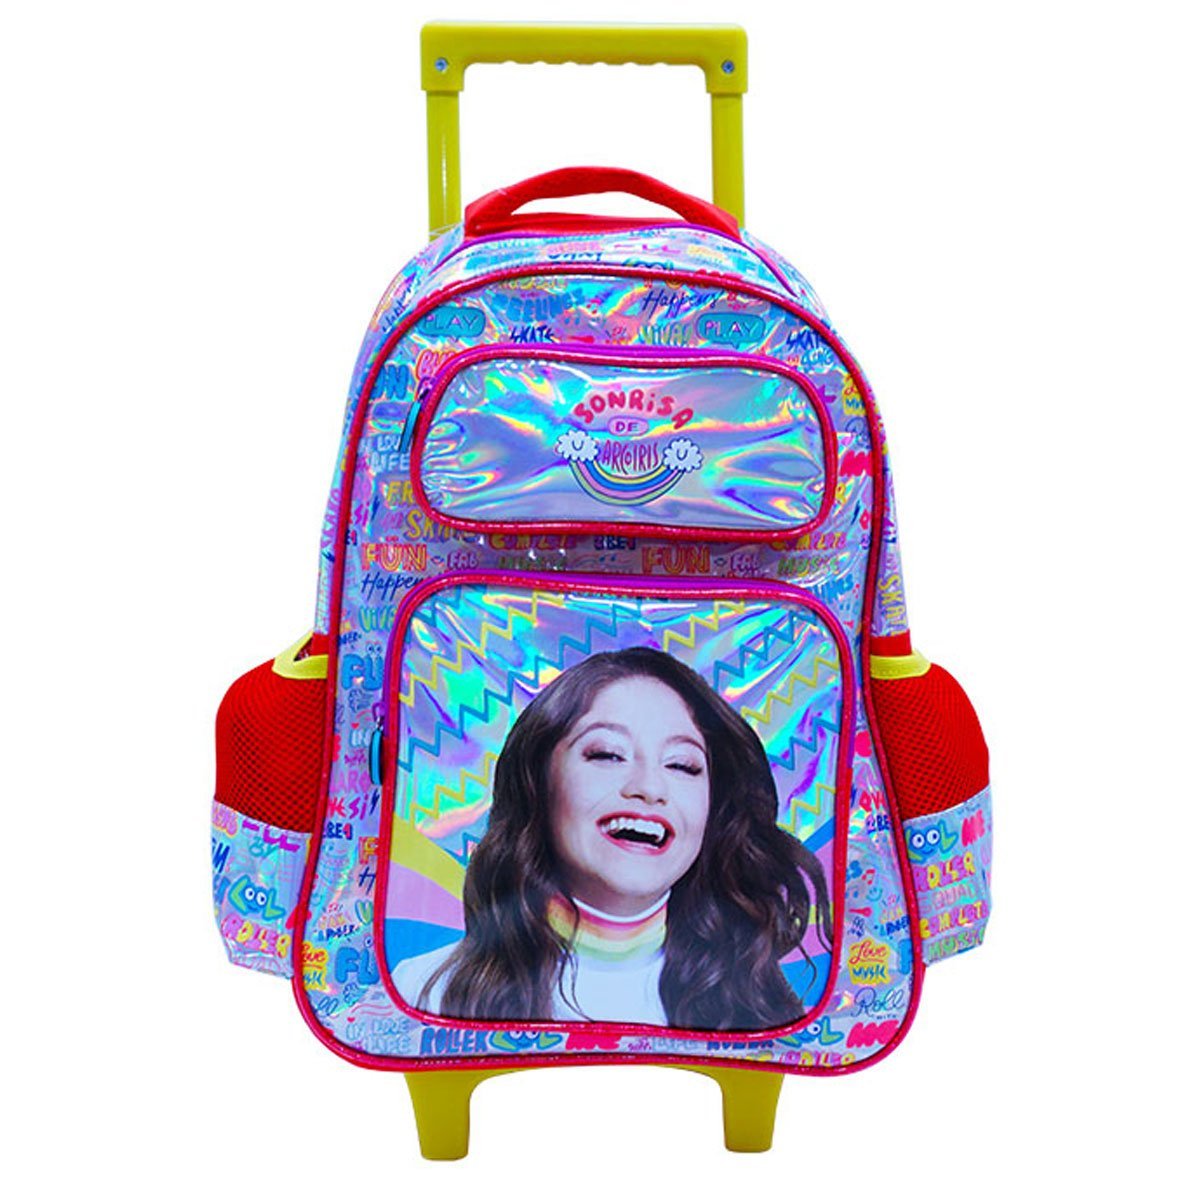 Tipo Backpack con Soy Luna Metalica Atm Packs